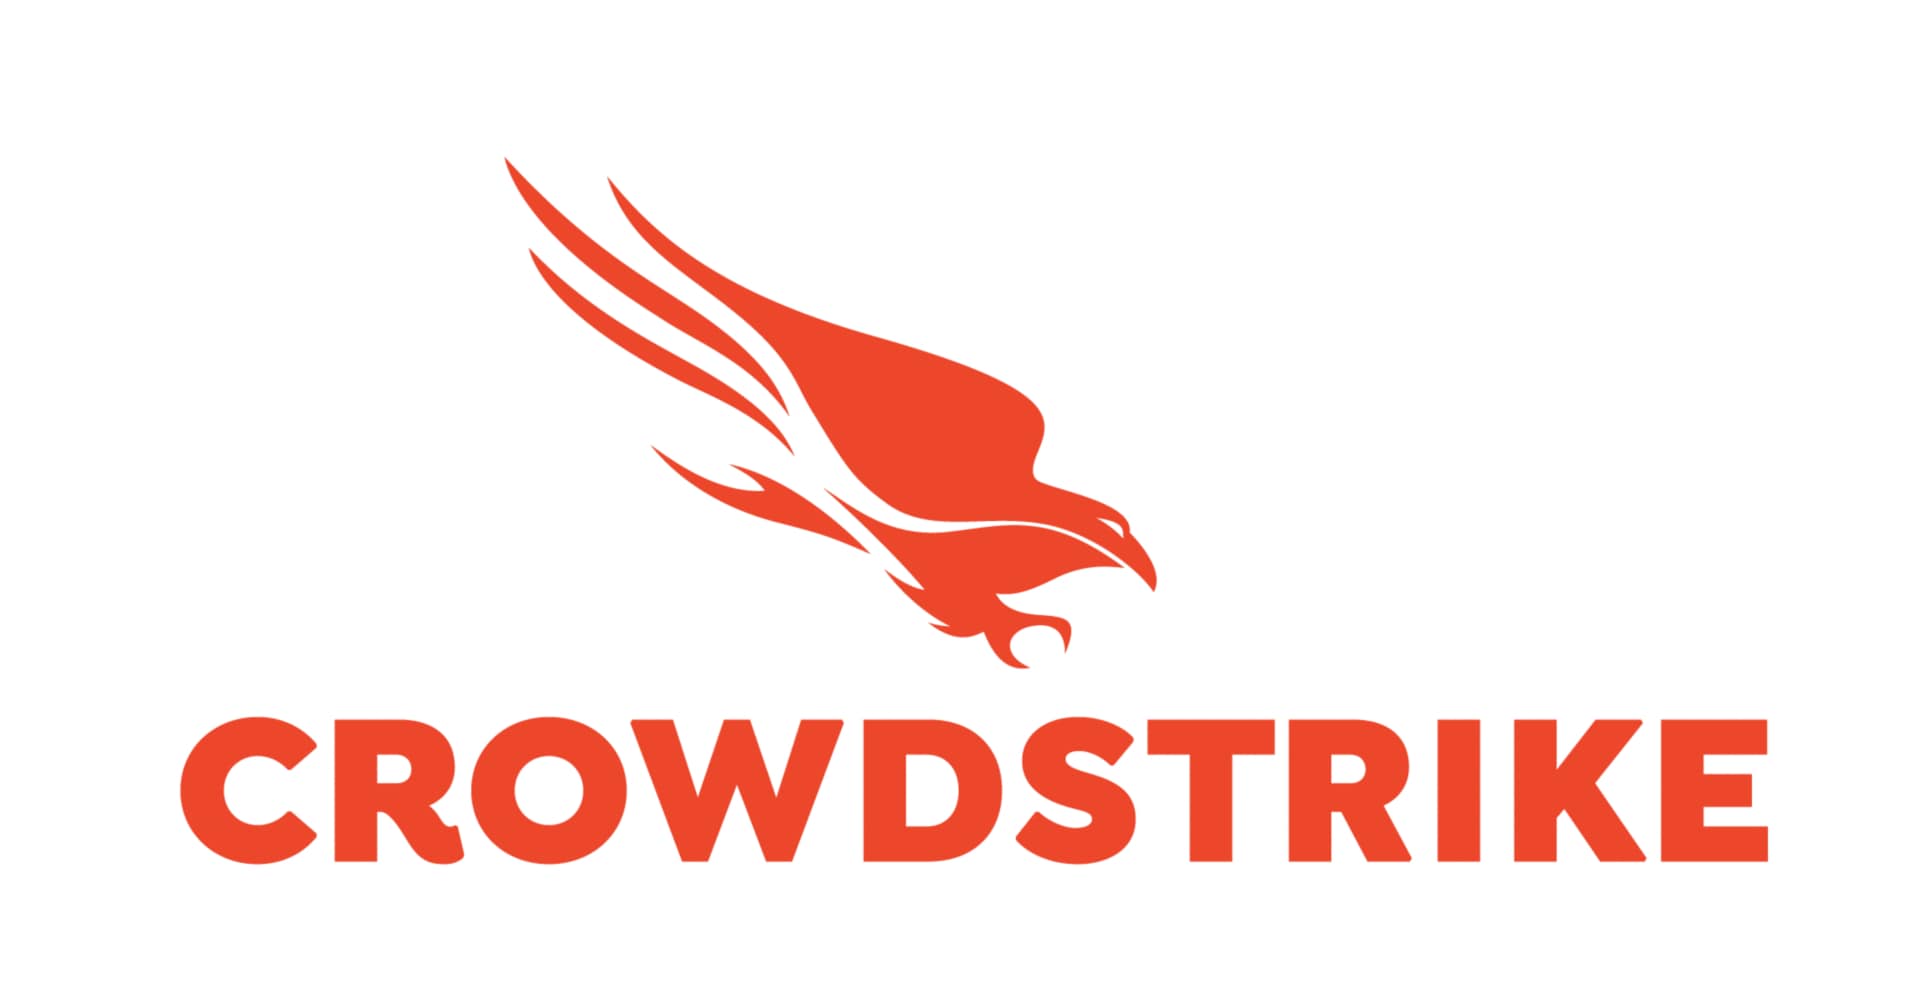 CrowdStrike 12-Month Humio Cloud for Falcon 365 Day Retention Software Subscription (300-499 Licenses)